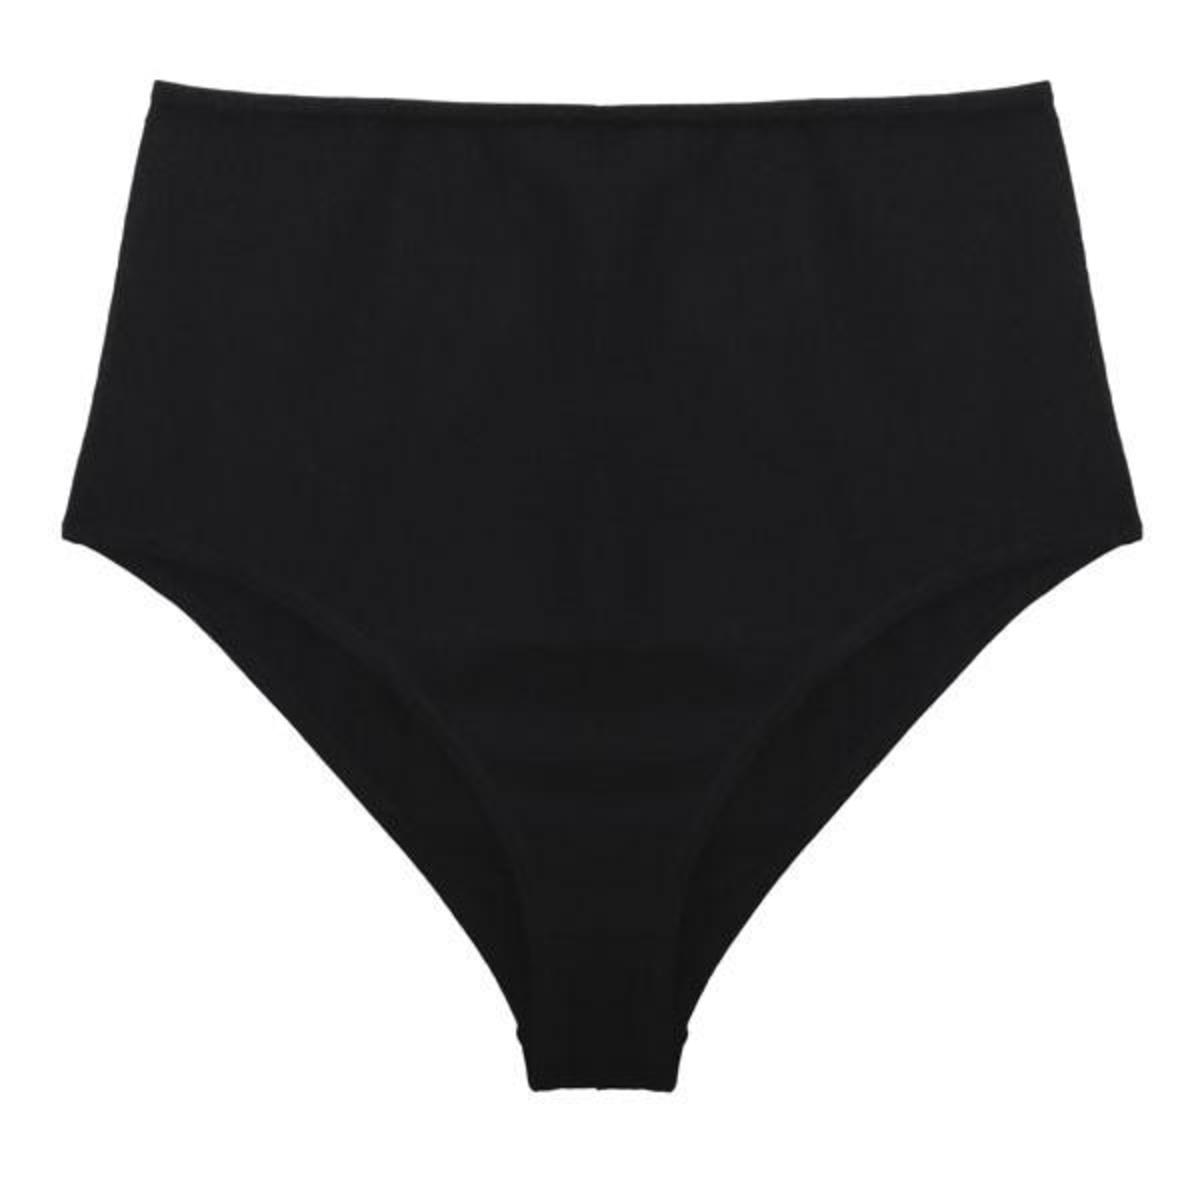 Nude Label high-waisted briefs, $29, available at Need Supply Co.